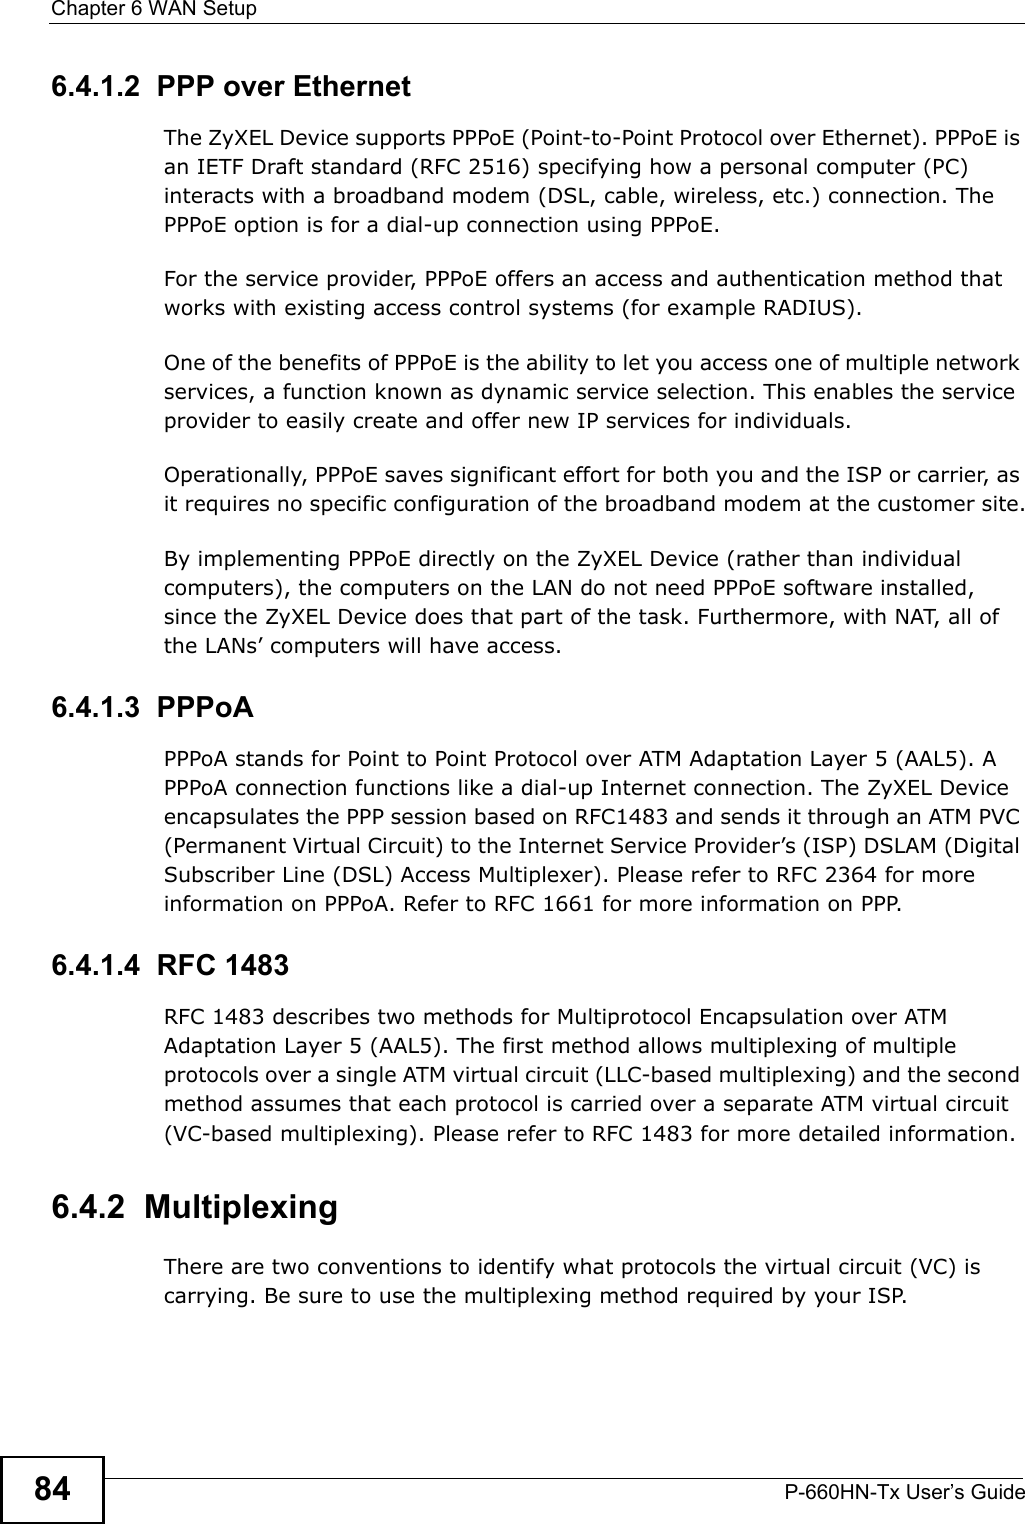 Chapter 6 WAN SetupP-660HN-Tx User’s Guide846.4.1.2  PPP over EthernetThe ZyXEL Device supports PPPoE (Point-to-Point Protocol over Ethernet). PPPoE is an IETF Draft standard (RFC 2516) specifying how a personal computer (PC) interacts with a broadband modem (DSL, cable, wireless, etc.) connection. The PPPoE option is for a dial-up connection using PPPoE.For the service provider, PPPoE offers an access and authentication method that works with existing access control systems (for example RADIUS).One of the benefits of PPPoE is the ability to let you access one of multiple network services, a function known as dynamic service selection. This enables the service provider to easily create and offer new IP services for individuals.Operationally, PPPoE saves significant effort for both you and the ISP or carrier, as it requires no specific configuration of the broadband modem at the customer site.By implementing PPPoE directly on the ZyXEL Device (rather than individual computers), the computers on the LAN do not need PPPoE software installed, since the ZyXEL Device does that part of the task. Furthermore, with NAT, all of the LANs’ computers will have access.6.4.1.3  PPPoAPPPoA stands for Point to Point Protocol over ATM Adaptation Layer 5 (AAL5). A PPPoA connection functions like a dial-up Internet connection. The ZyXEL Device encapsulates the PPP session based on RFC1483 and sends it through an ATM PVC (Permanent Virtual Circuit) to the Internet Service Provider’s (ISP) DSLAM (Digital Subscriber Line (DSL) Access Multiplexer). Please refer to RFC 2364 for more information on PPPoA. Refer to RFC 1661 for more information on PPP.6.4.1.4  RFC 1483RFC 1483 describes two methods for Multiprotocol Encapsulation over ATM Adaptation Layer 5 (AAL5). The first method allows multiplexing of multiple protocols over a single ATM virtual circuit (LLC-based multiplexing) and the second method assumes that each protocol is carried over a separate ATM virtual circuit (VC-based multiplexing). Please refer to RFC 1483 for more detailed information.6.4.2  MultiplexingThere are two conventions to identify what protocols the virtual circuit (VC) is carrying. Be sure to use the multiplexing method required by your ISP.